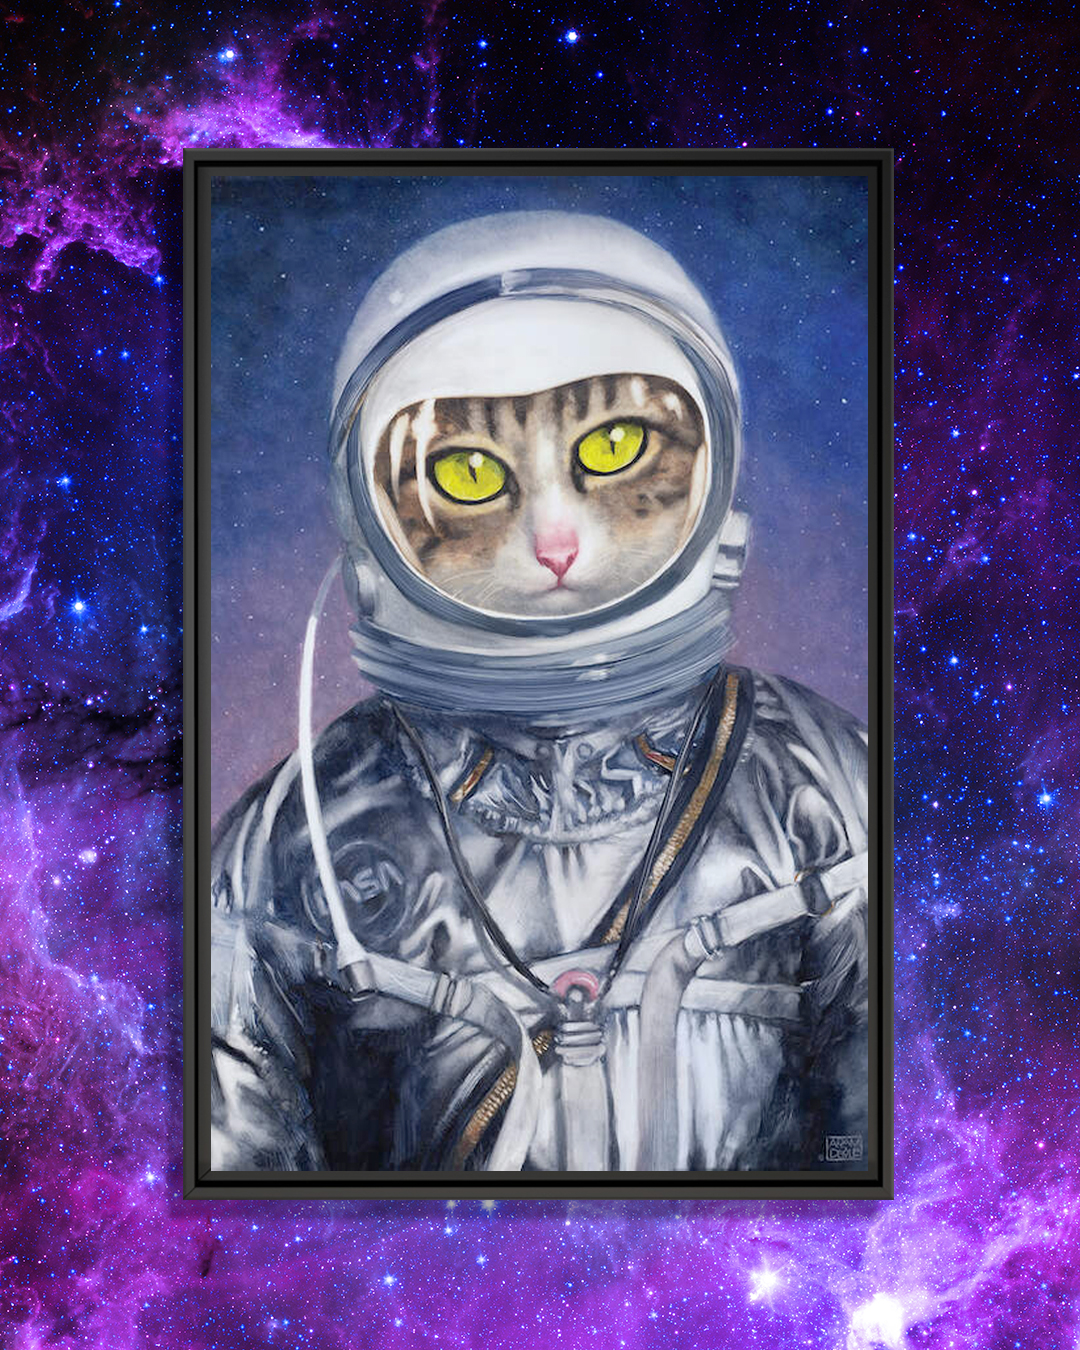 a cat with green eyes wearing an astronaut suit in space